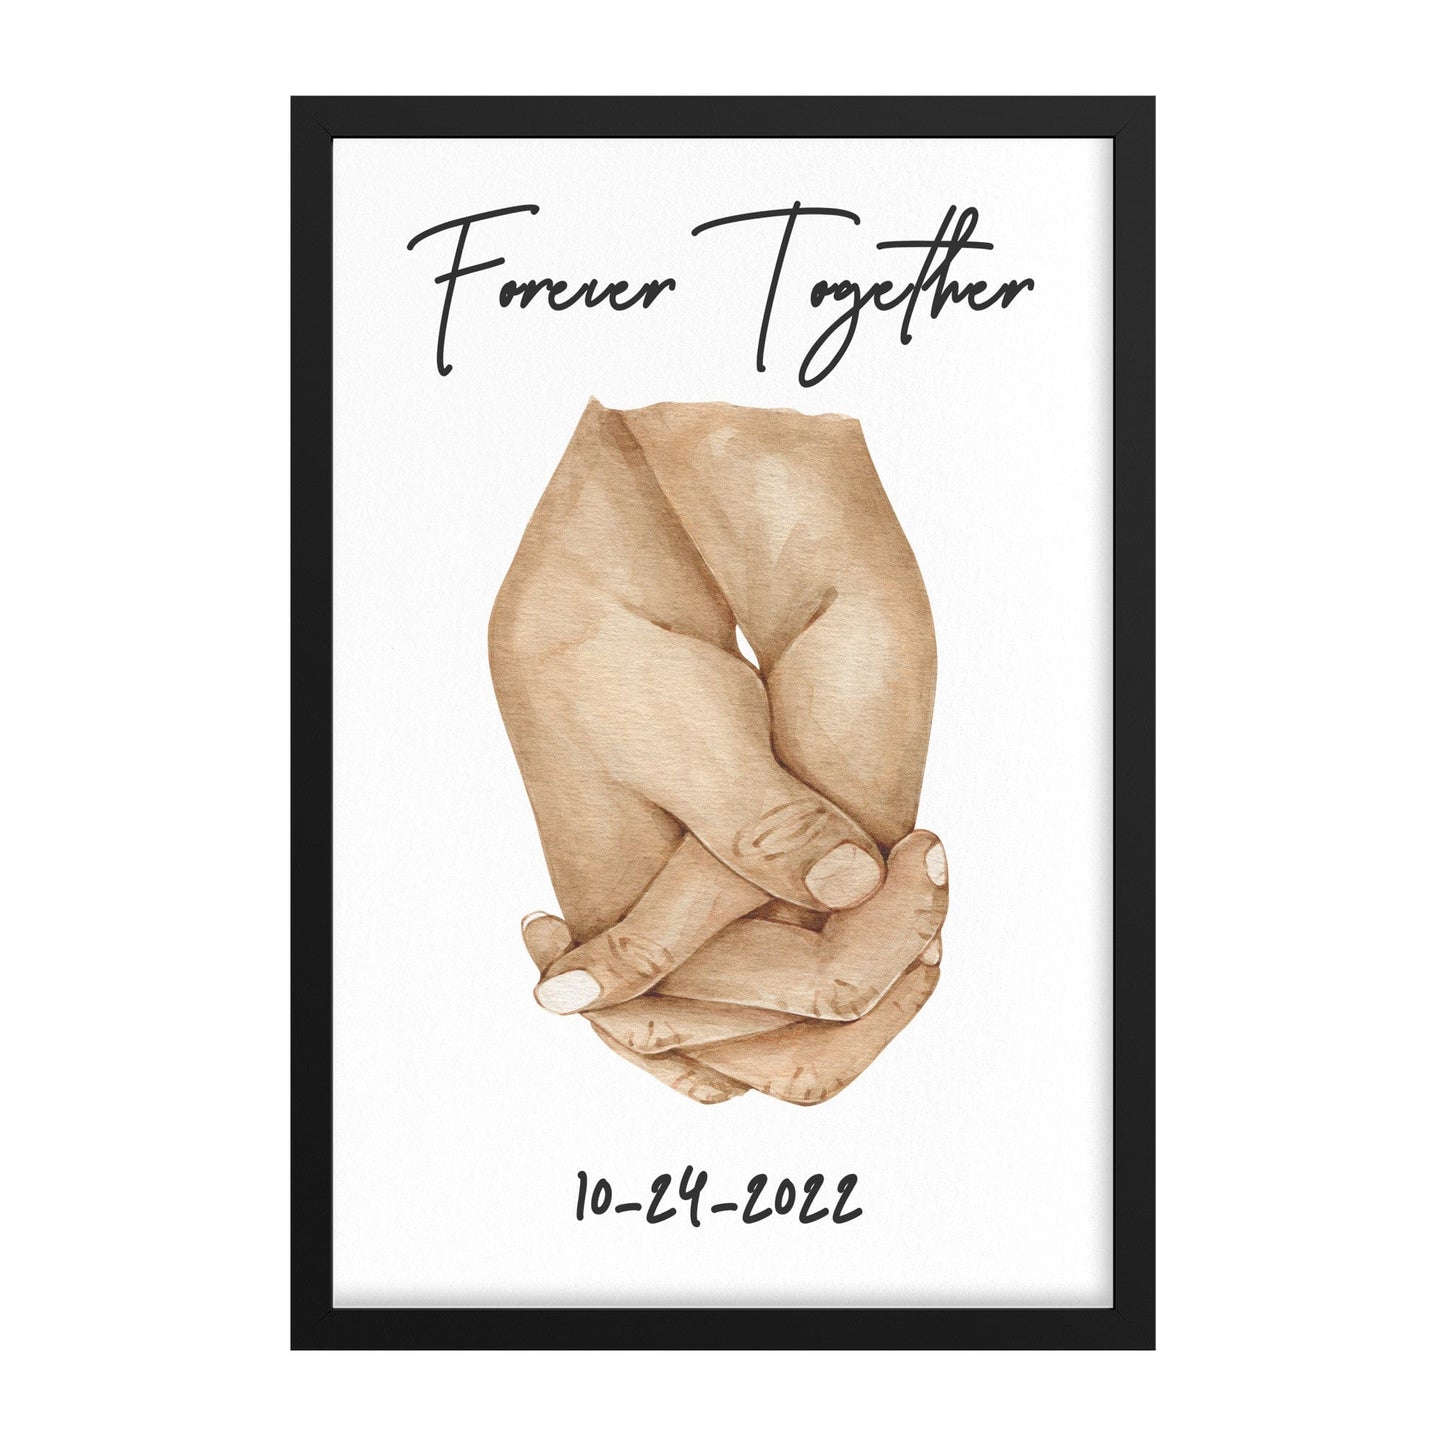 Forever Together Framed Canvas Wall Art, Personalized Gifts